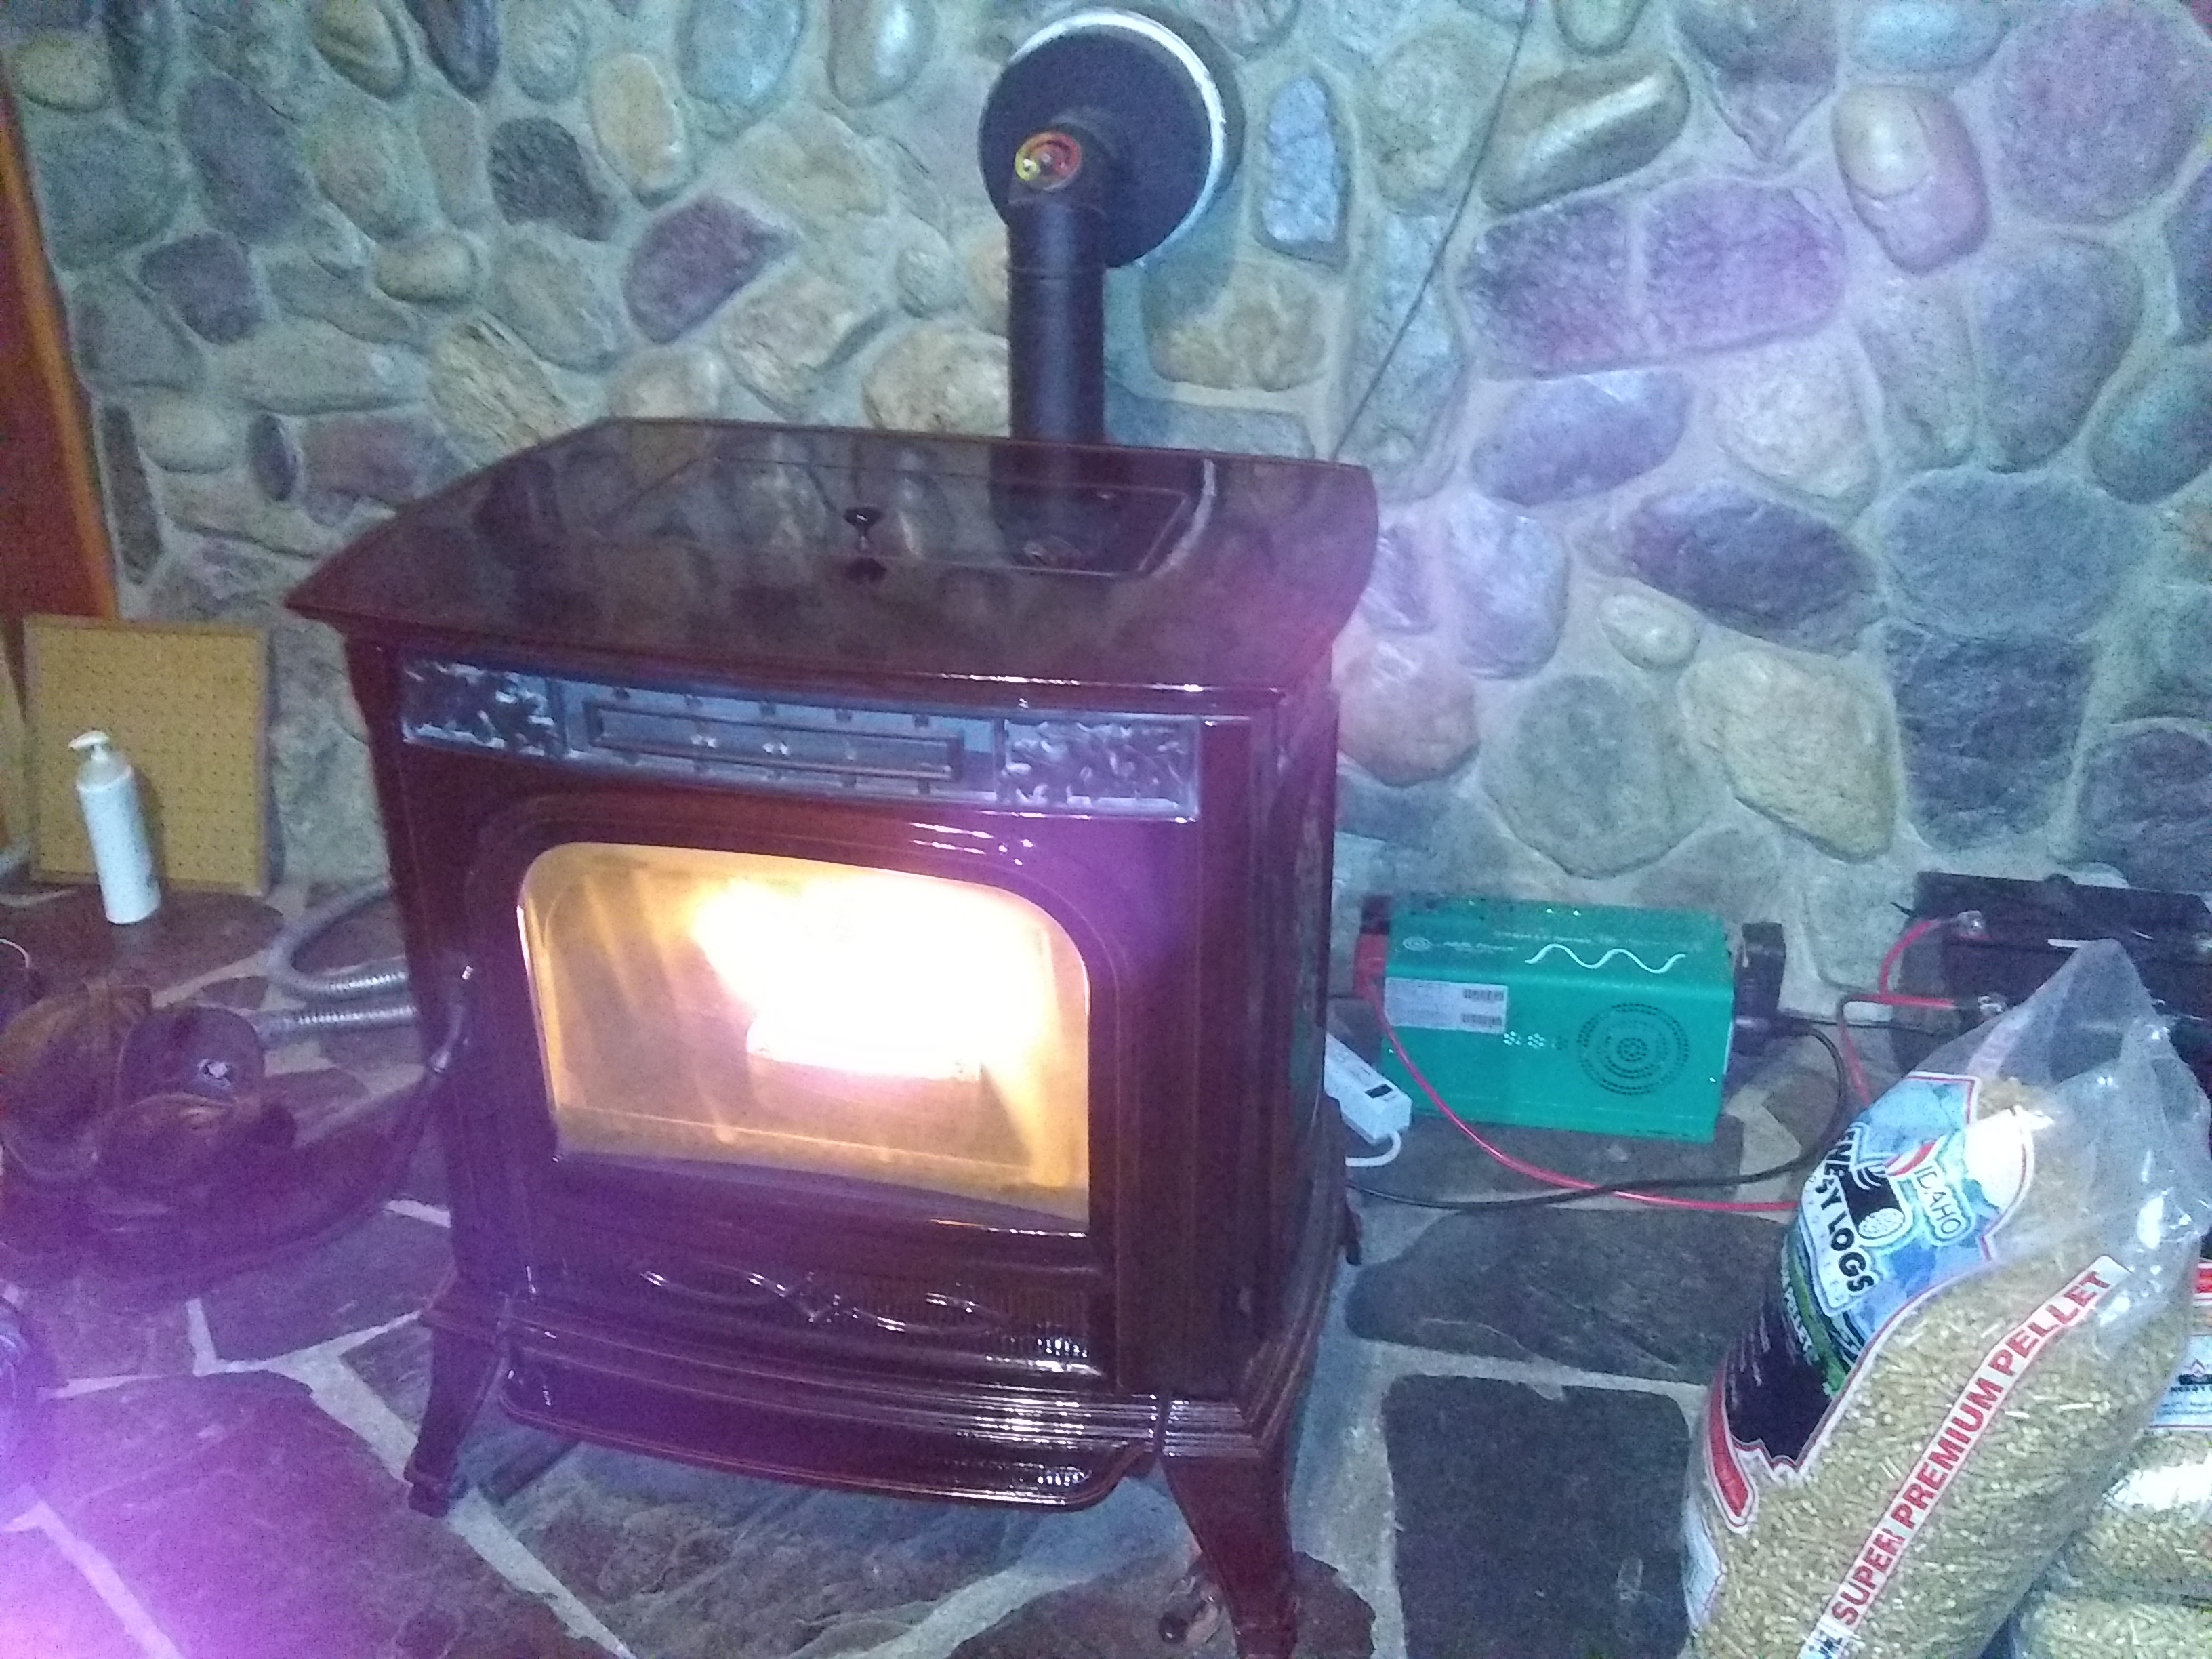 What pellet stove brand?